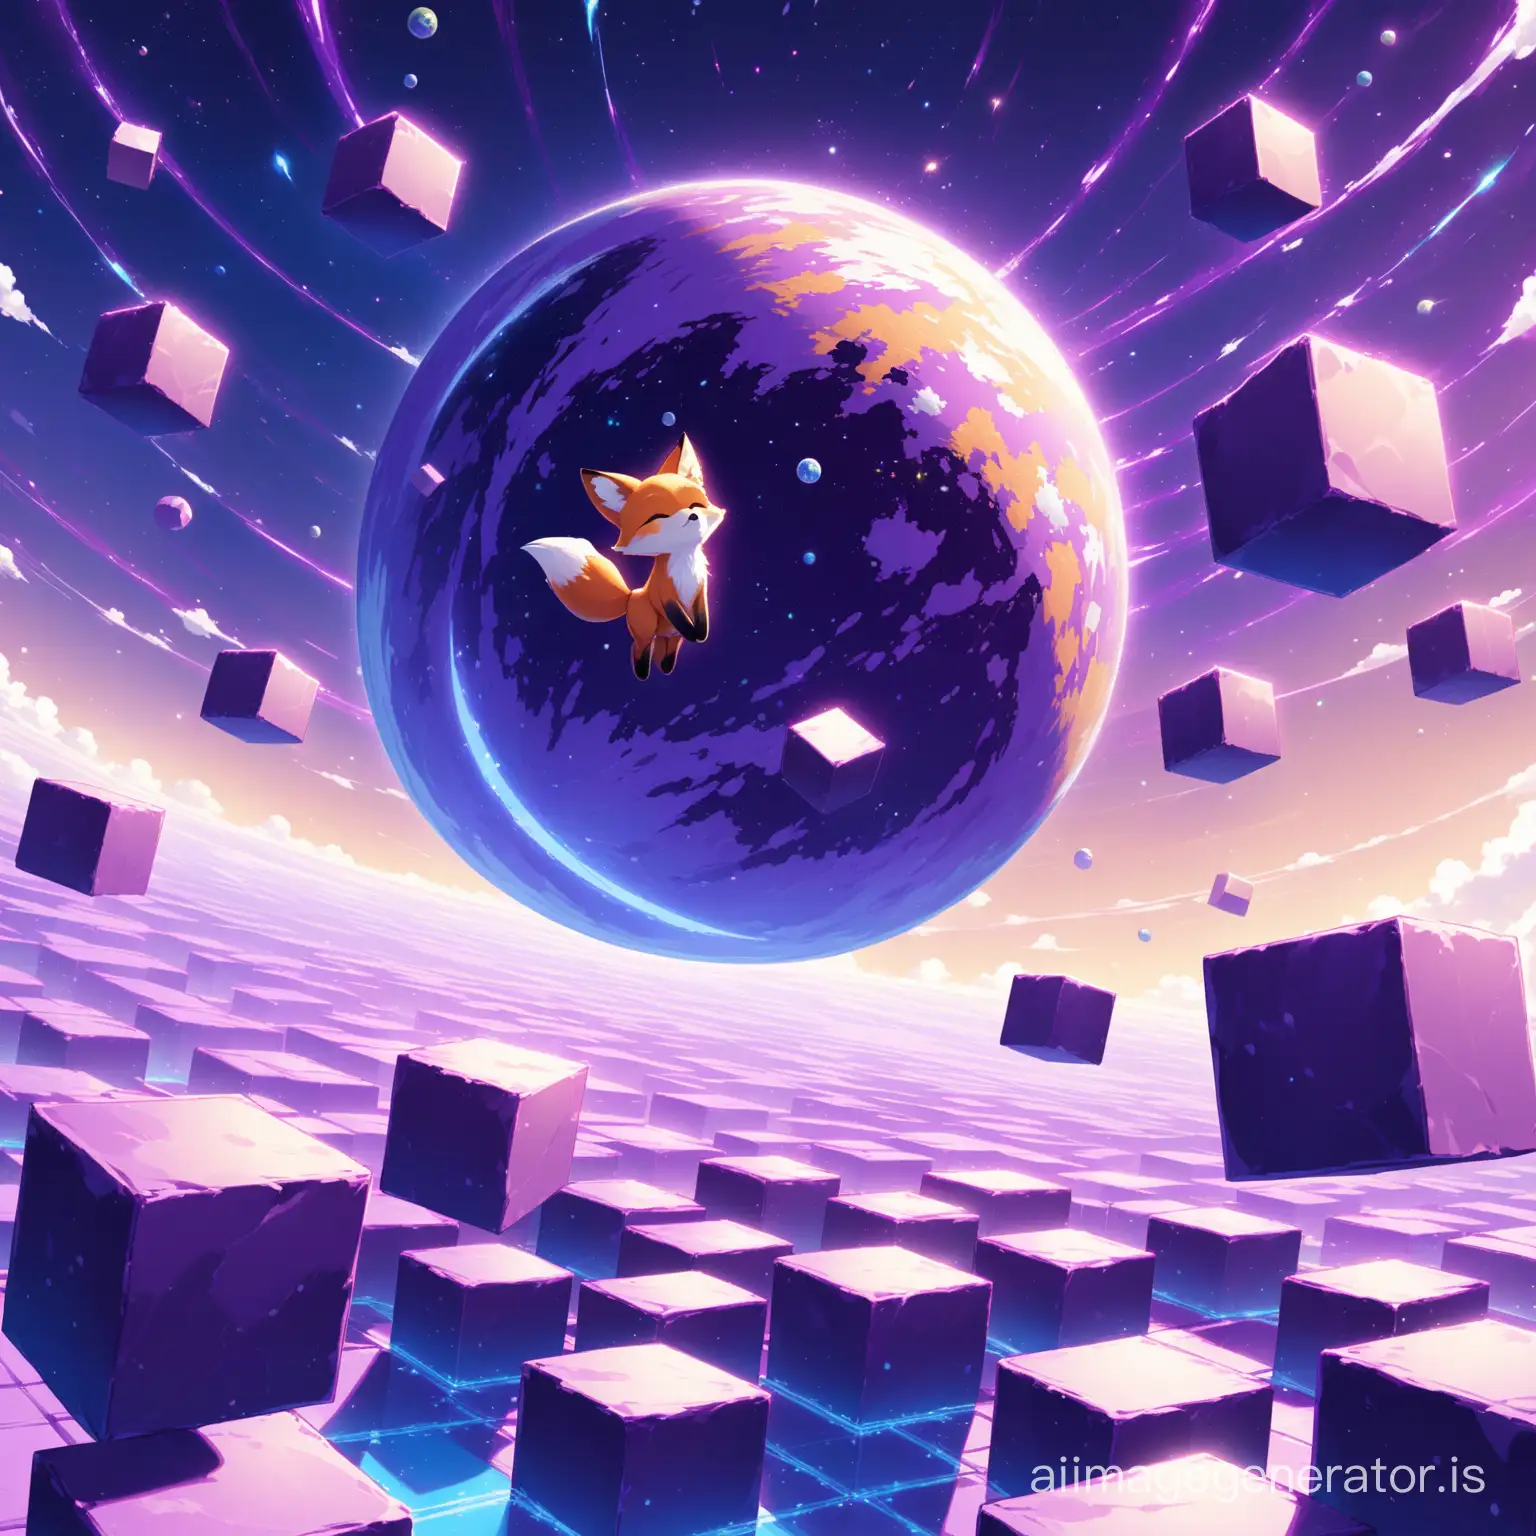 A little cute fox  flying on the  purple block earth with super detail and High Quality
big and Purple and floating blocks are seen everywhere
Details are evident beautifully and with great precision
